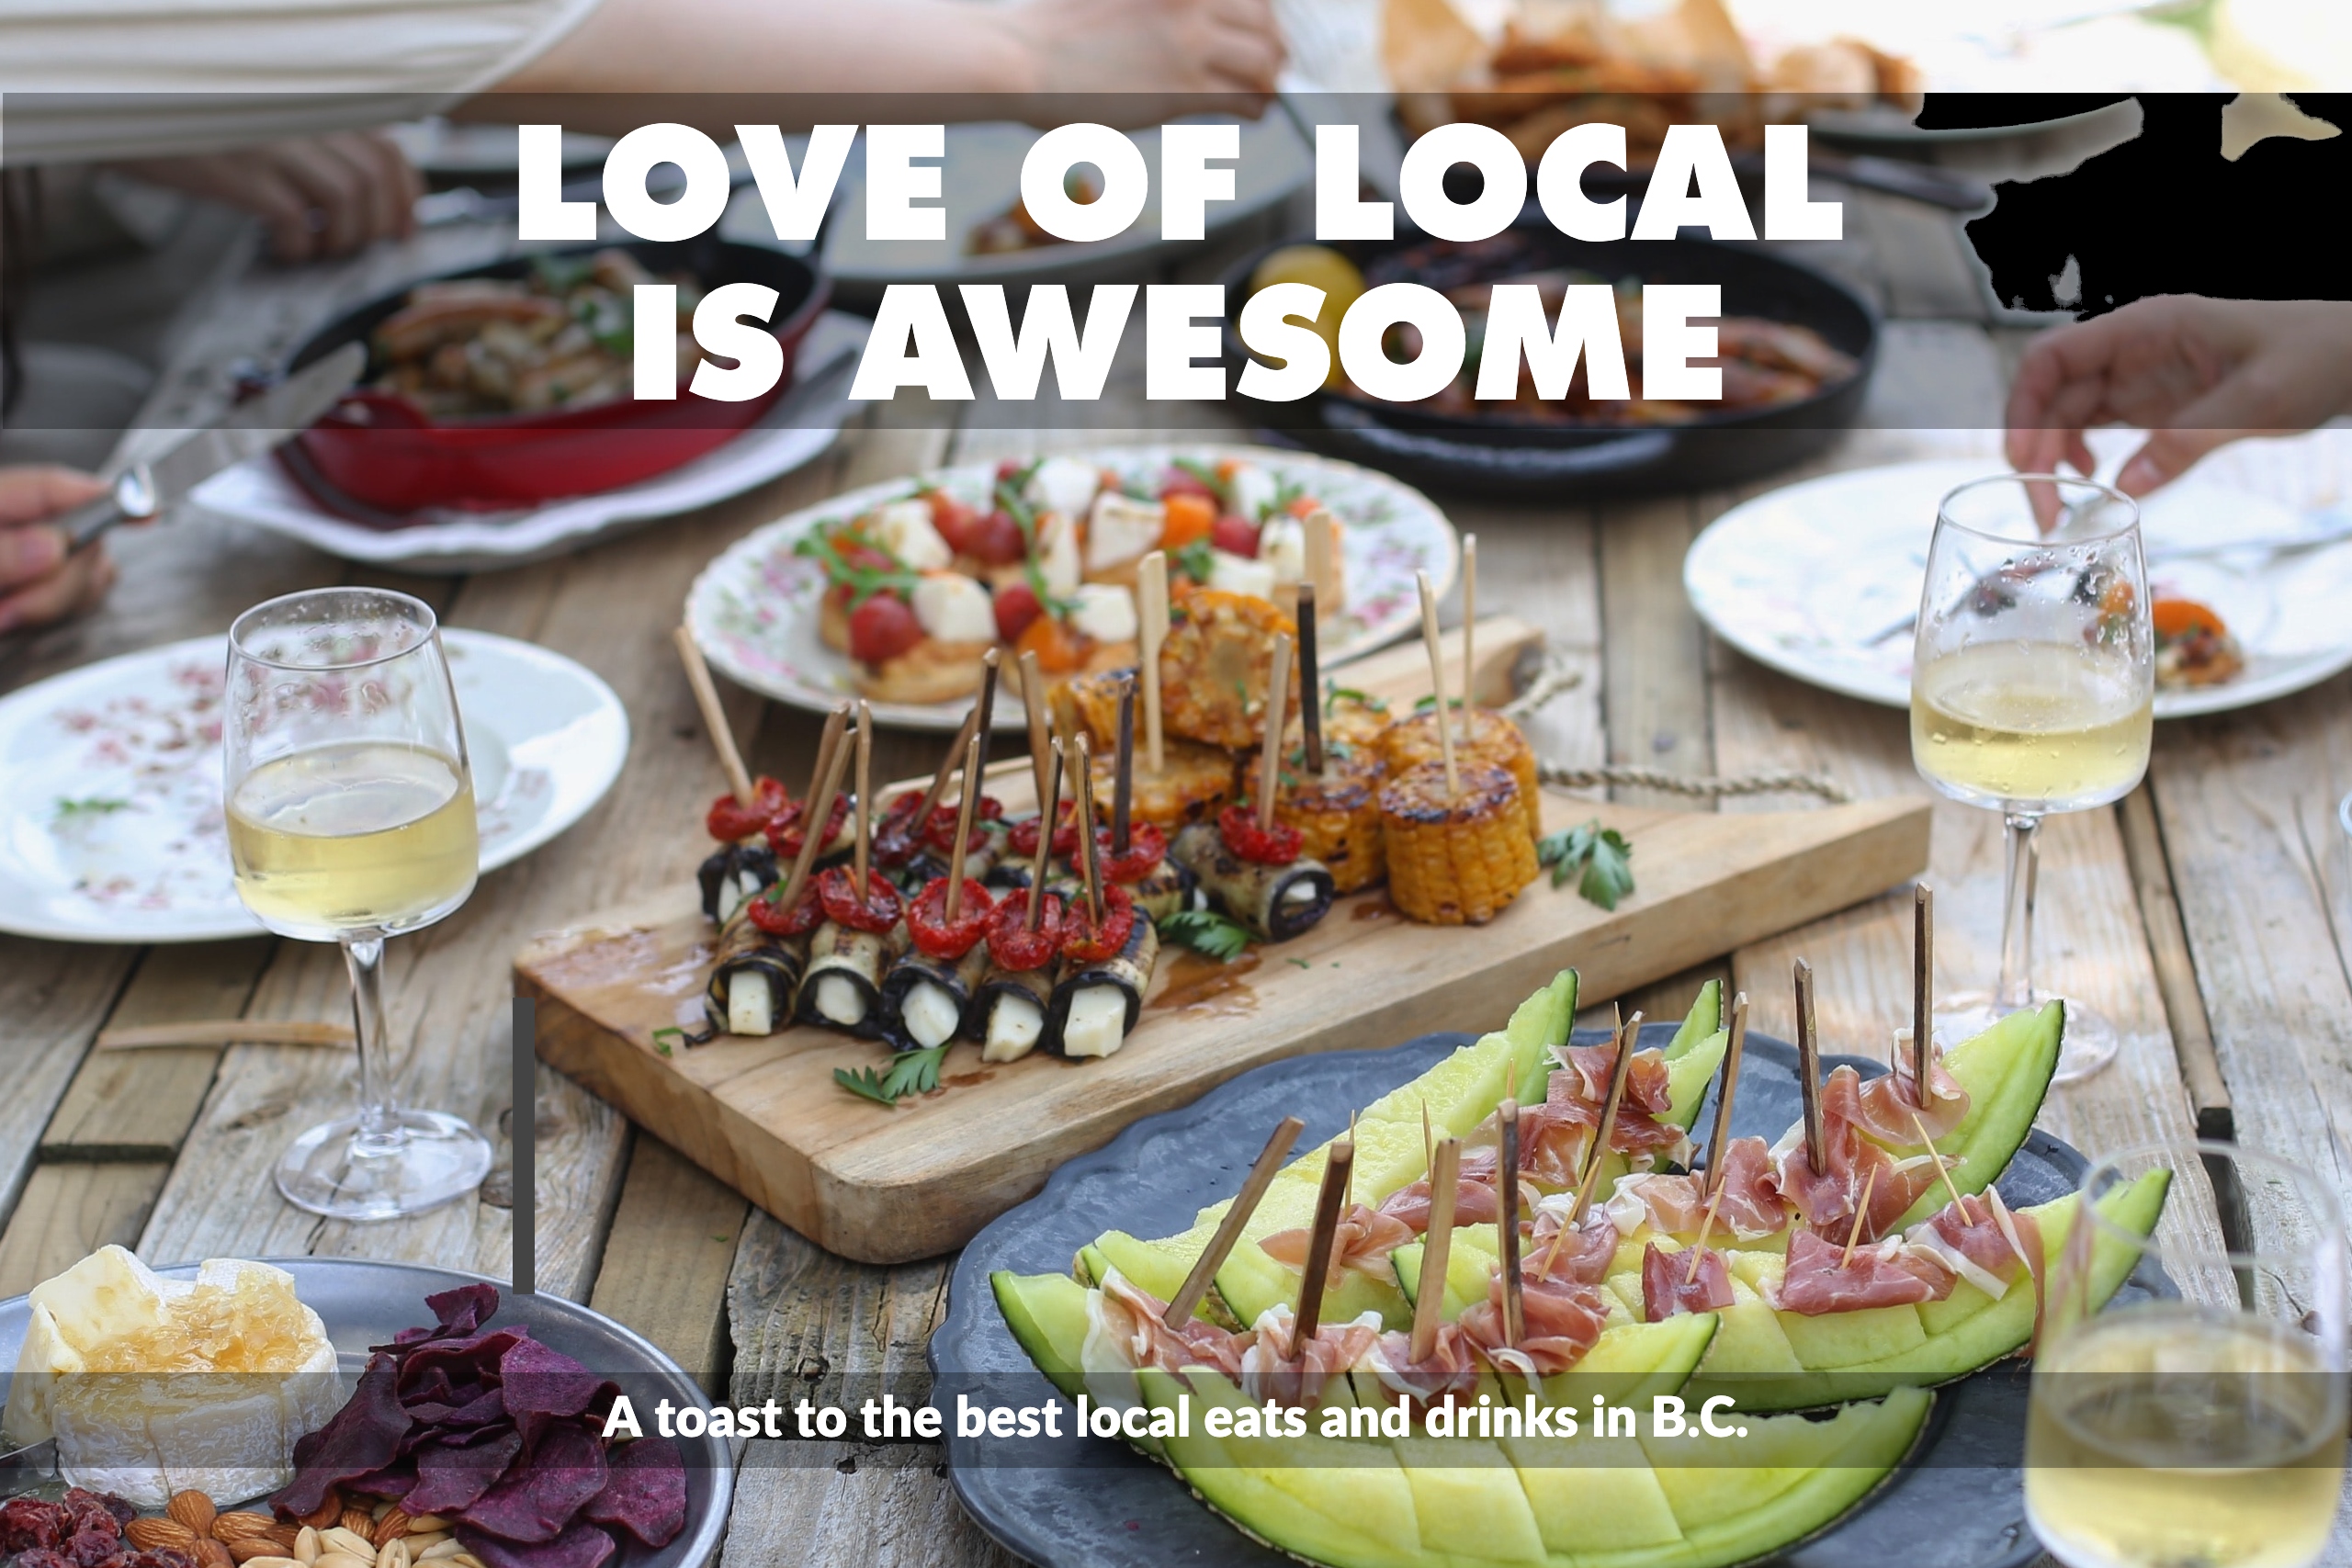 LOVE OF LOCAL IS AWESOME